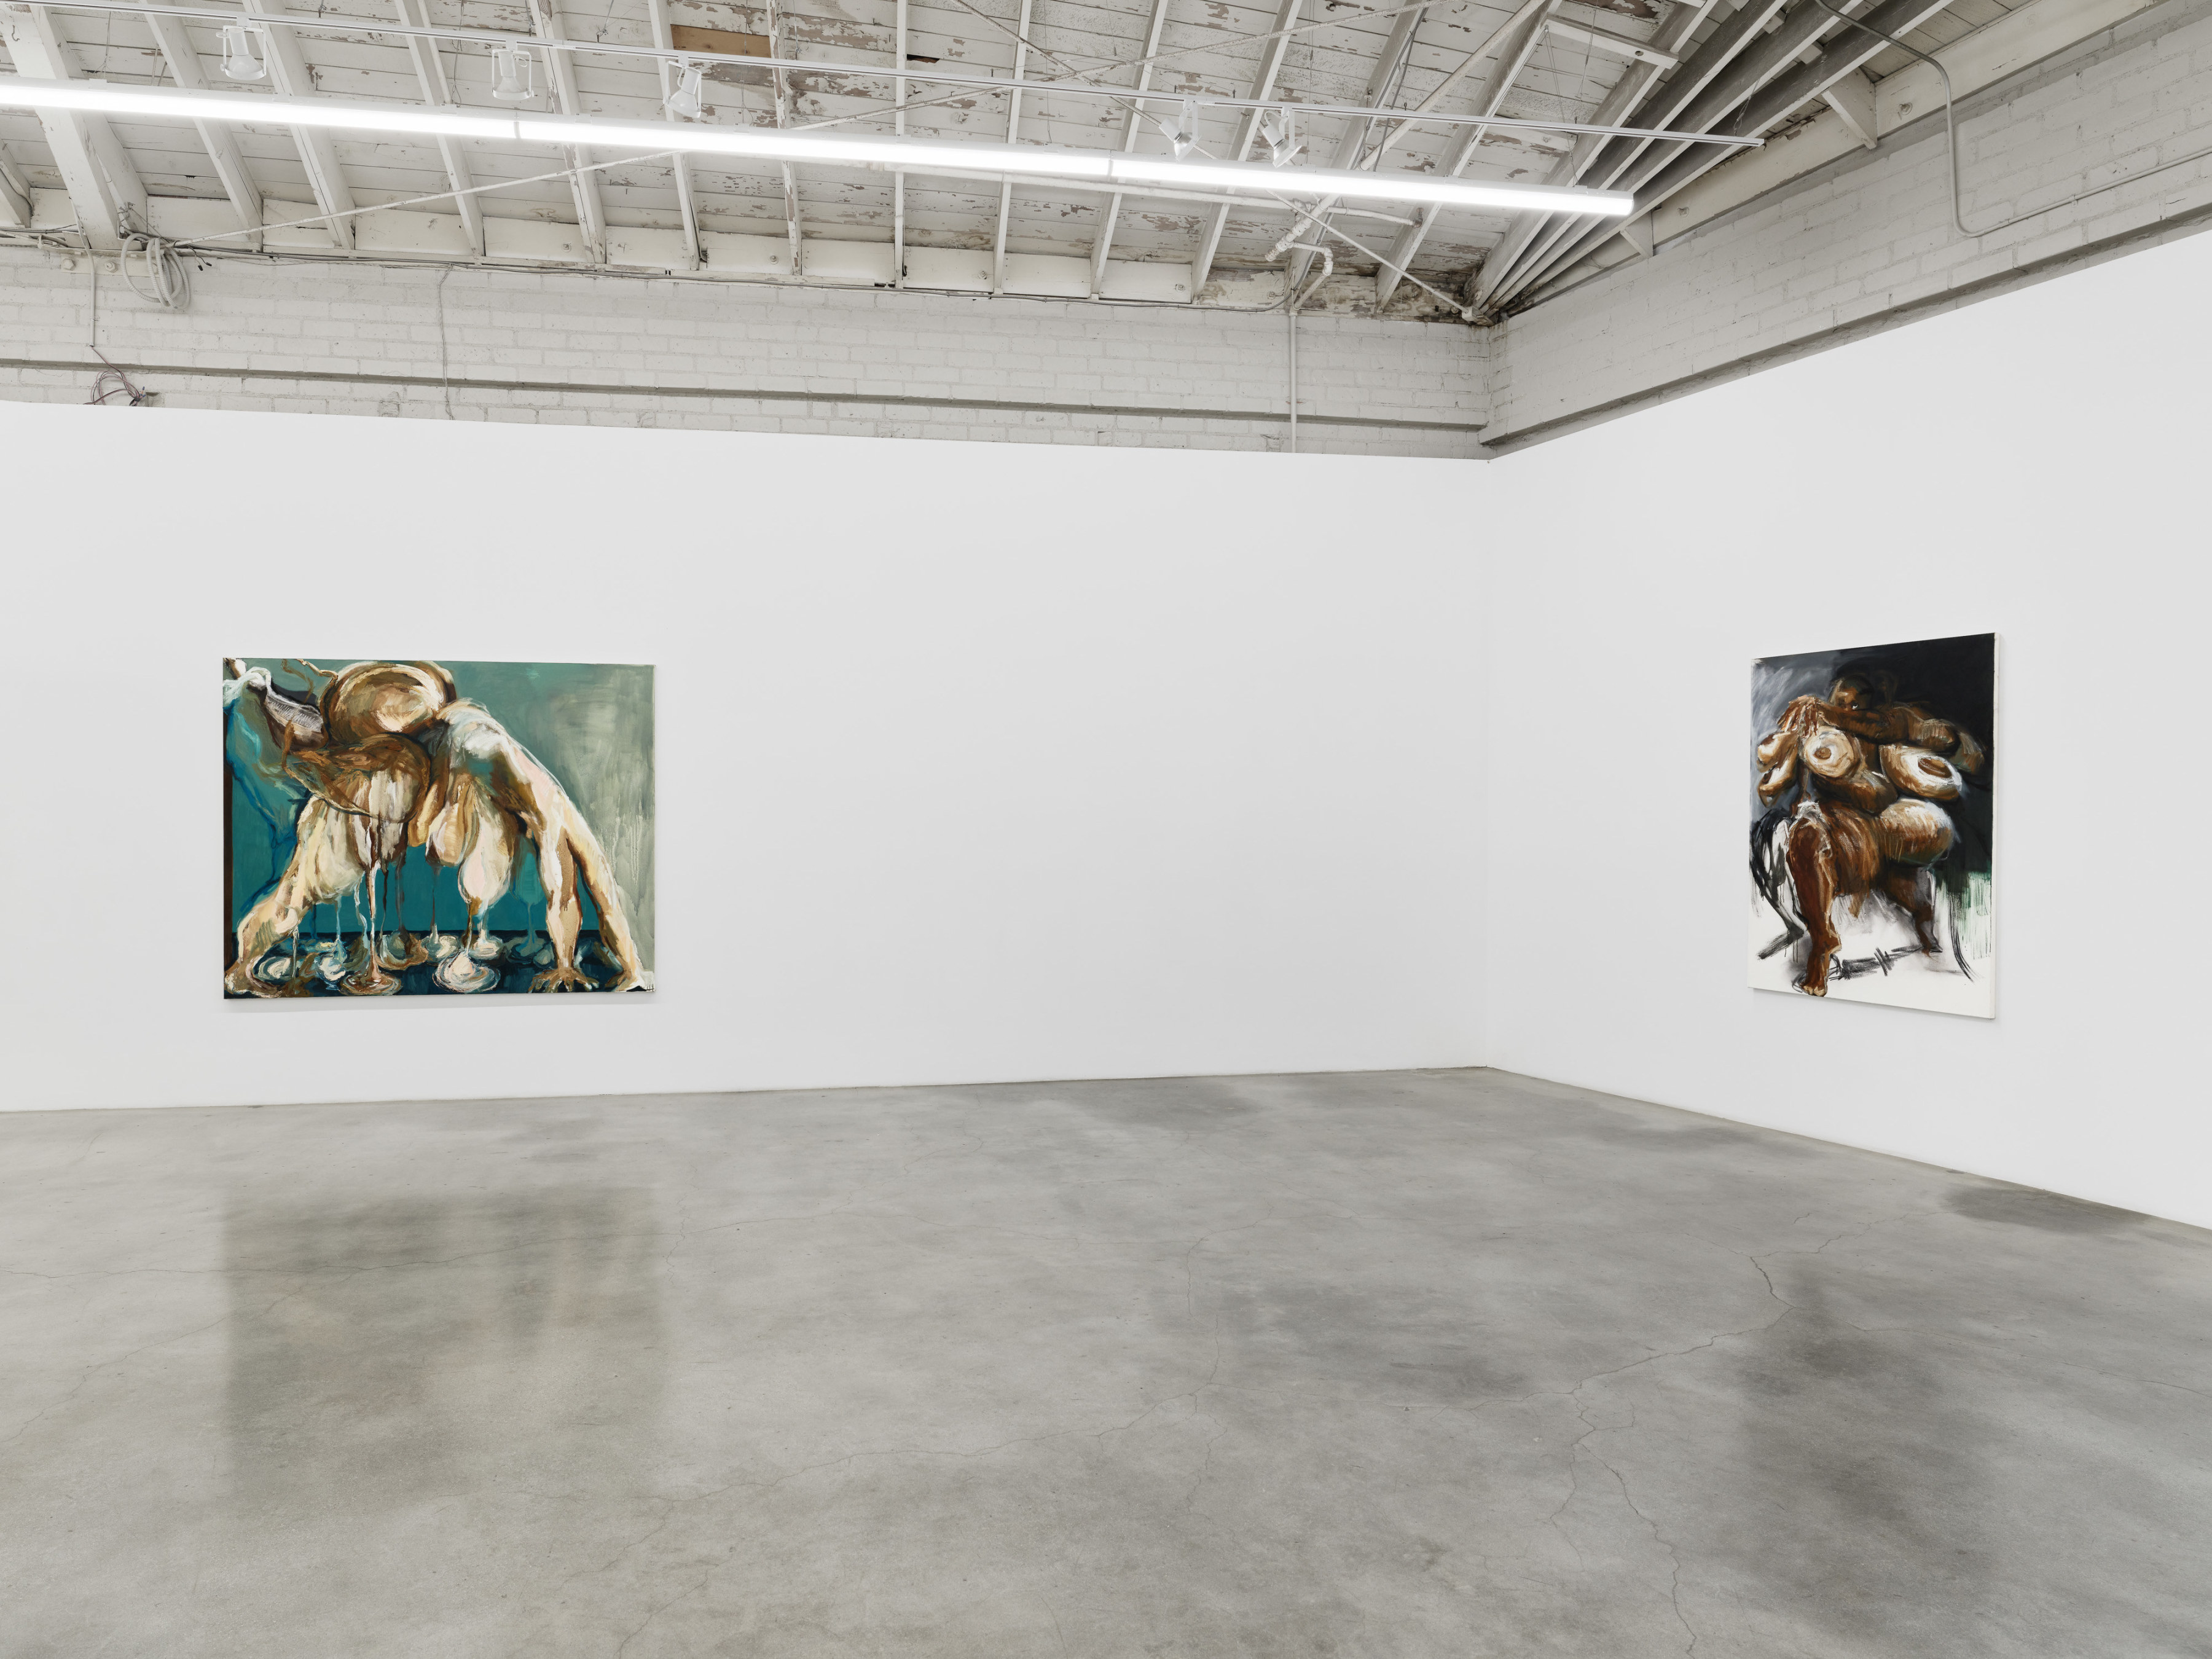 Installation view of Márcia Falcão’s “Flesh Monuments” at Night Gallery 